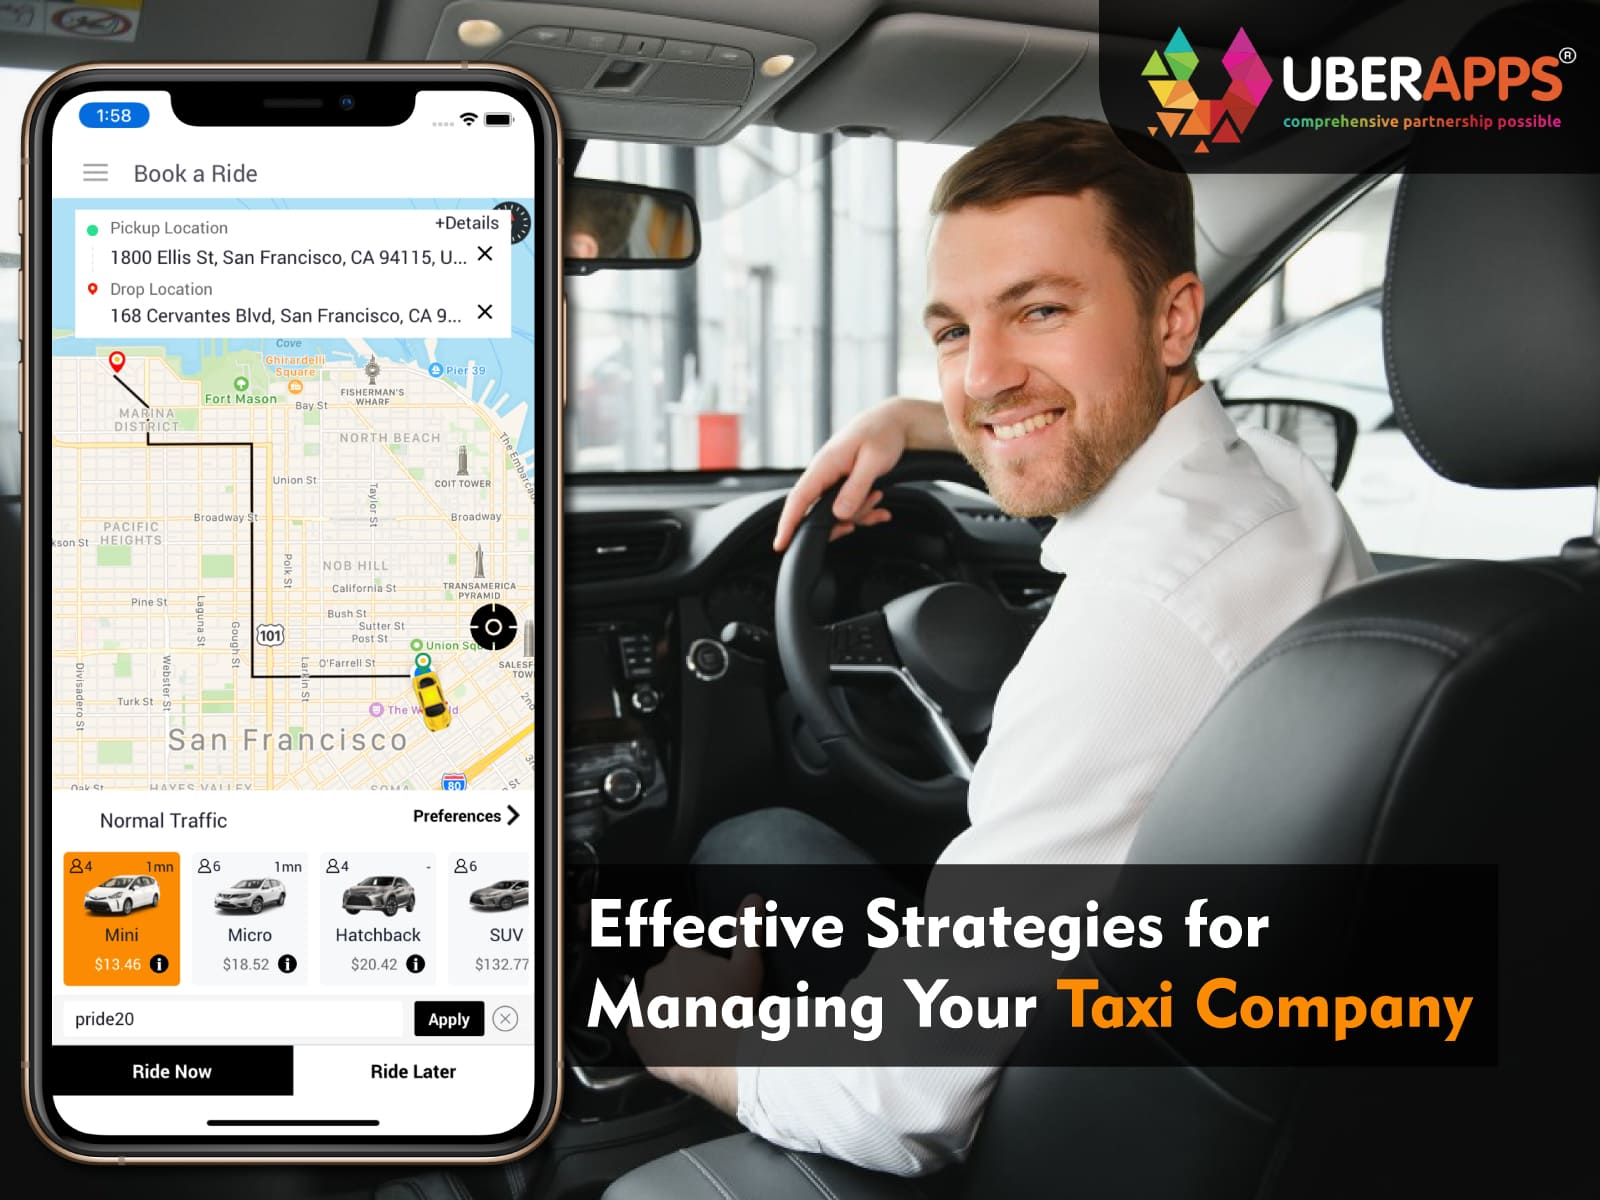 Effective Strategies for Managing Your Taxi Company